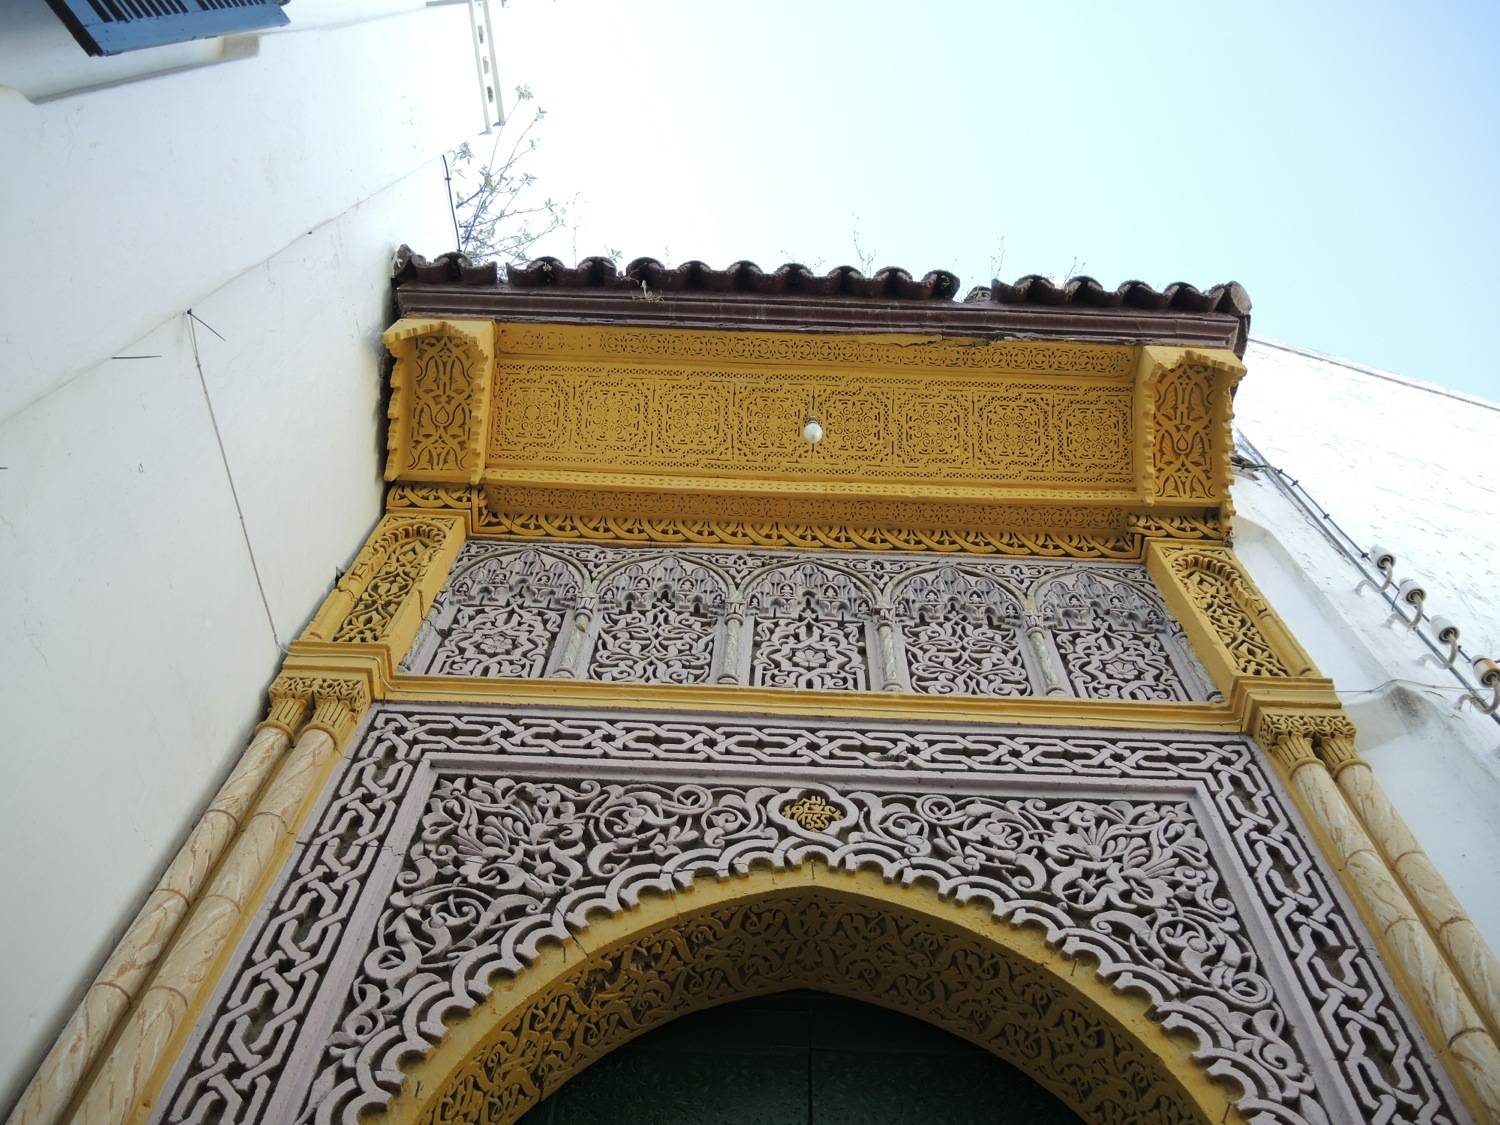 Detail view of the stucco decoration at the top of the main portal